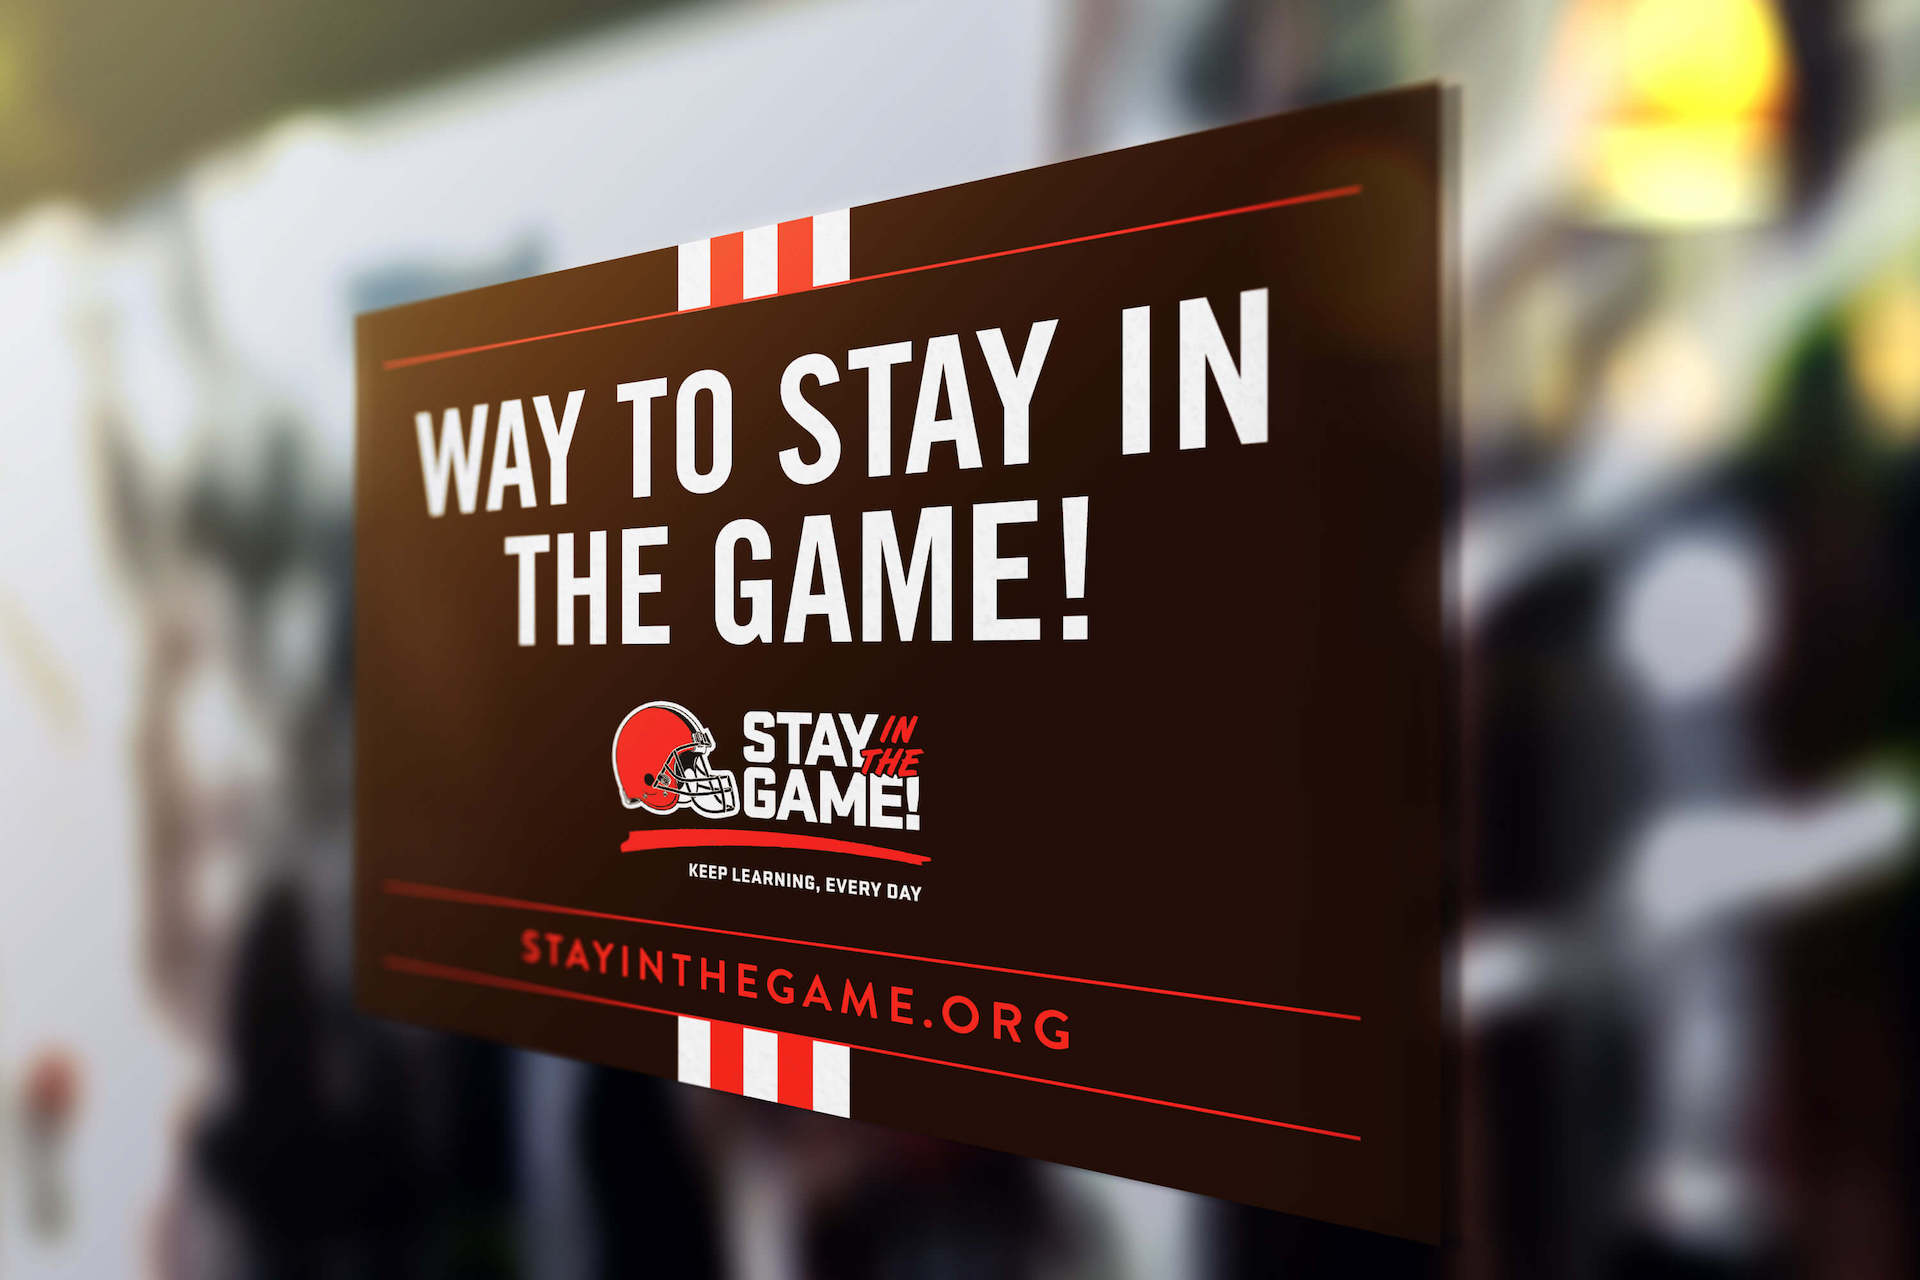 Stay in the Game storefront sign on a window